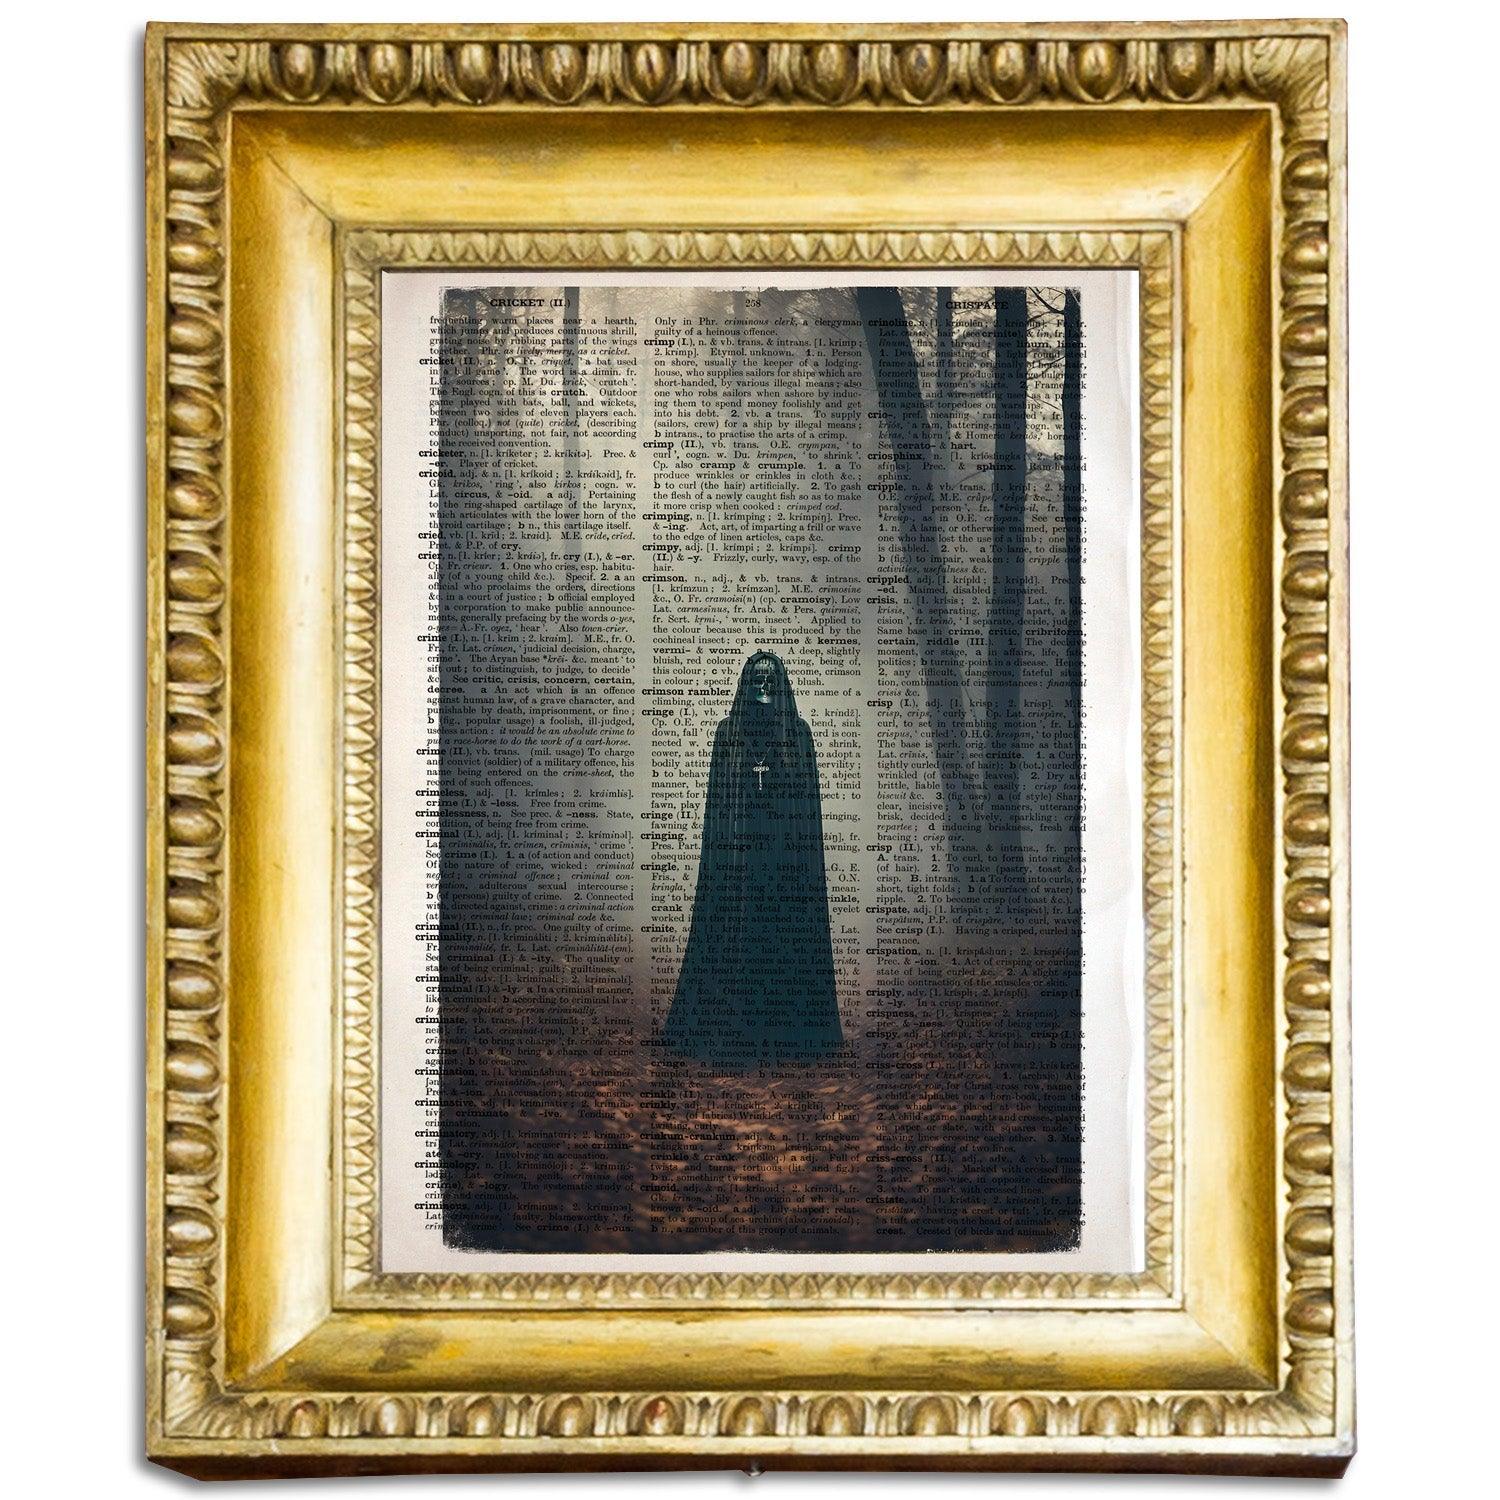 Discover the allure of the unknown with our Dark Art pieces, a reflection of gothic aesthetics and shadowy mysteries that will ignite your imagination.